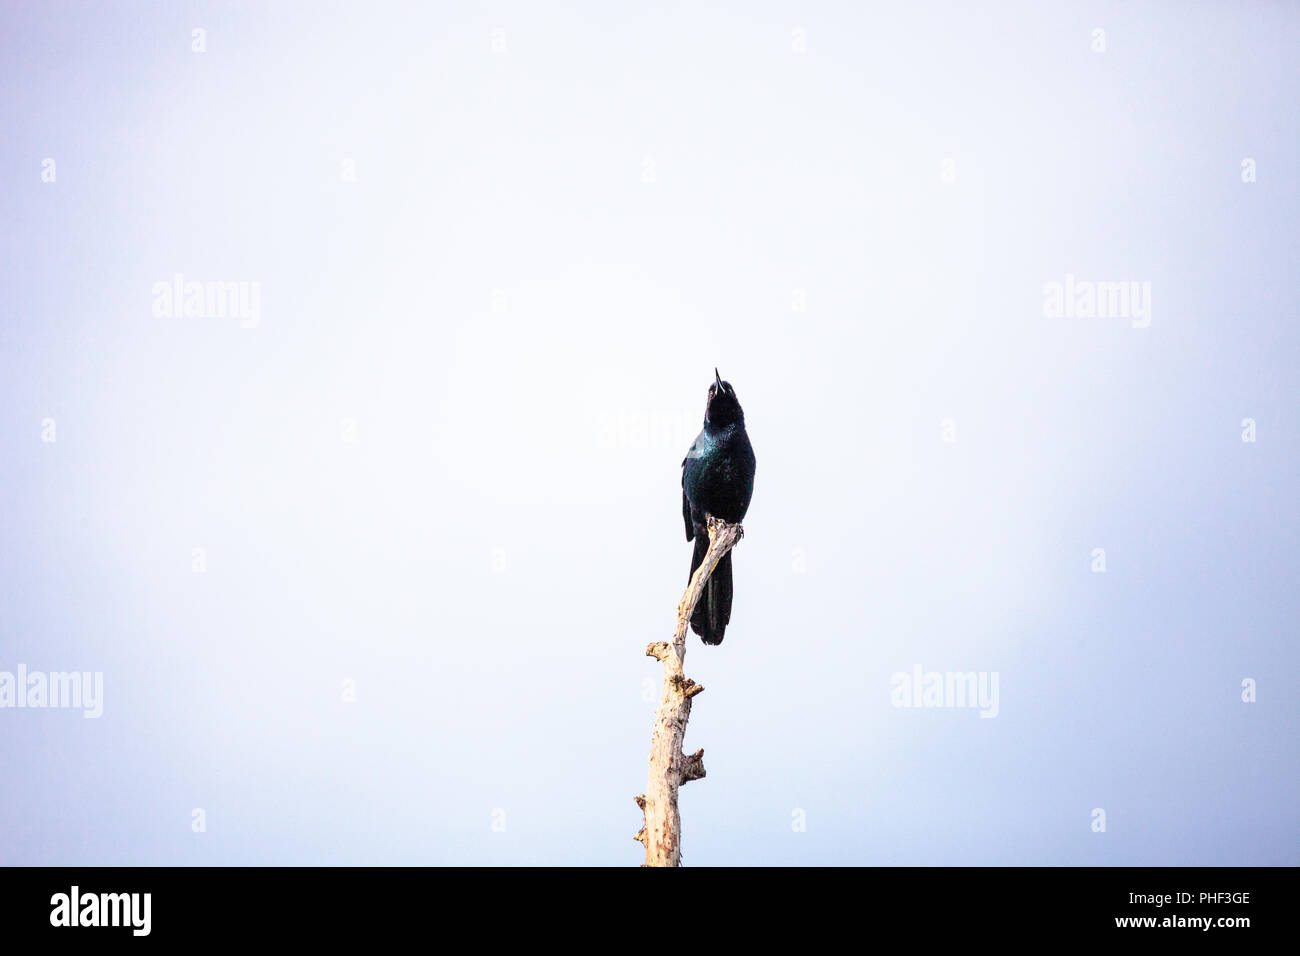 Common Grackle bird Quiscalus quiscula Stock Photo